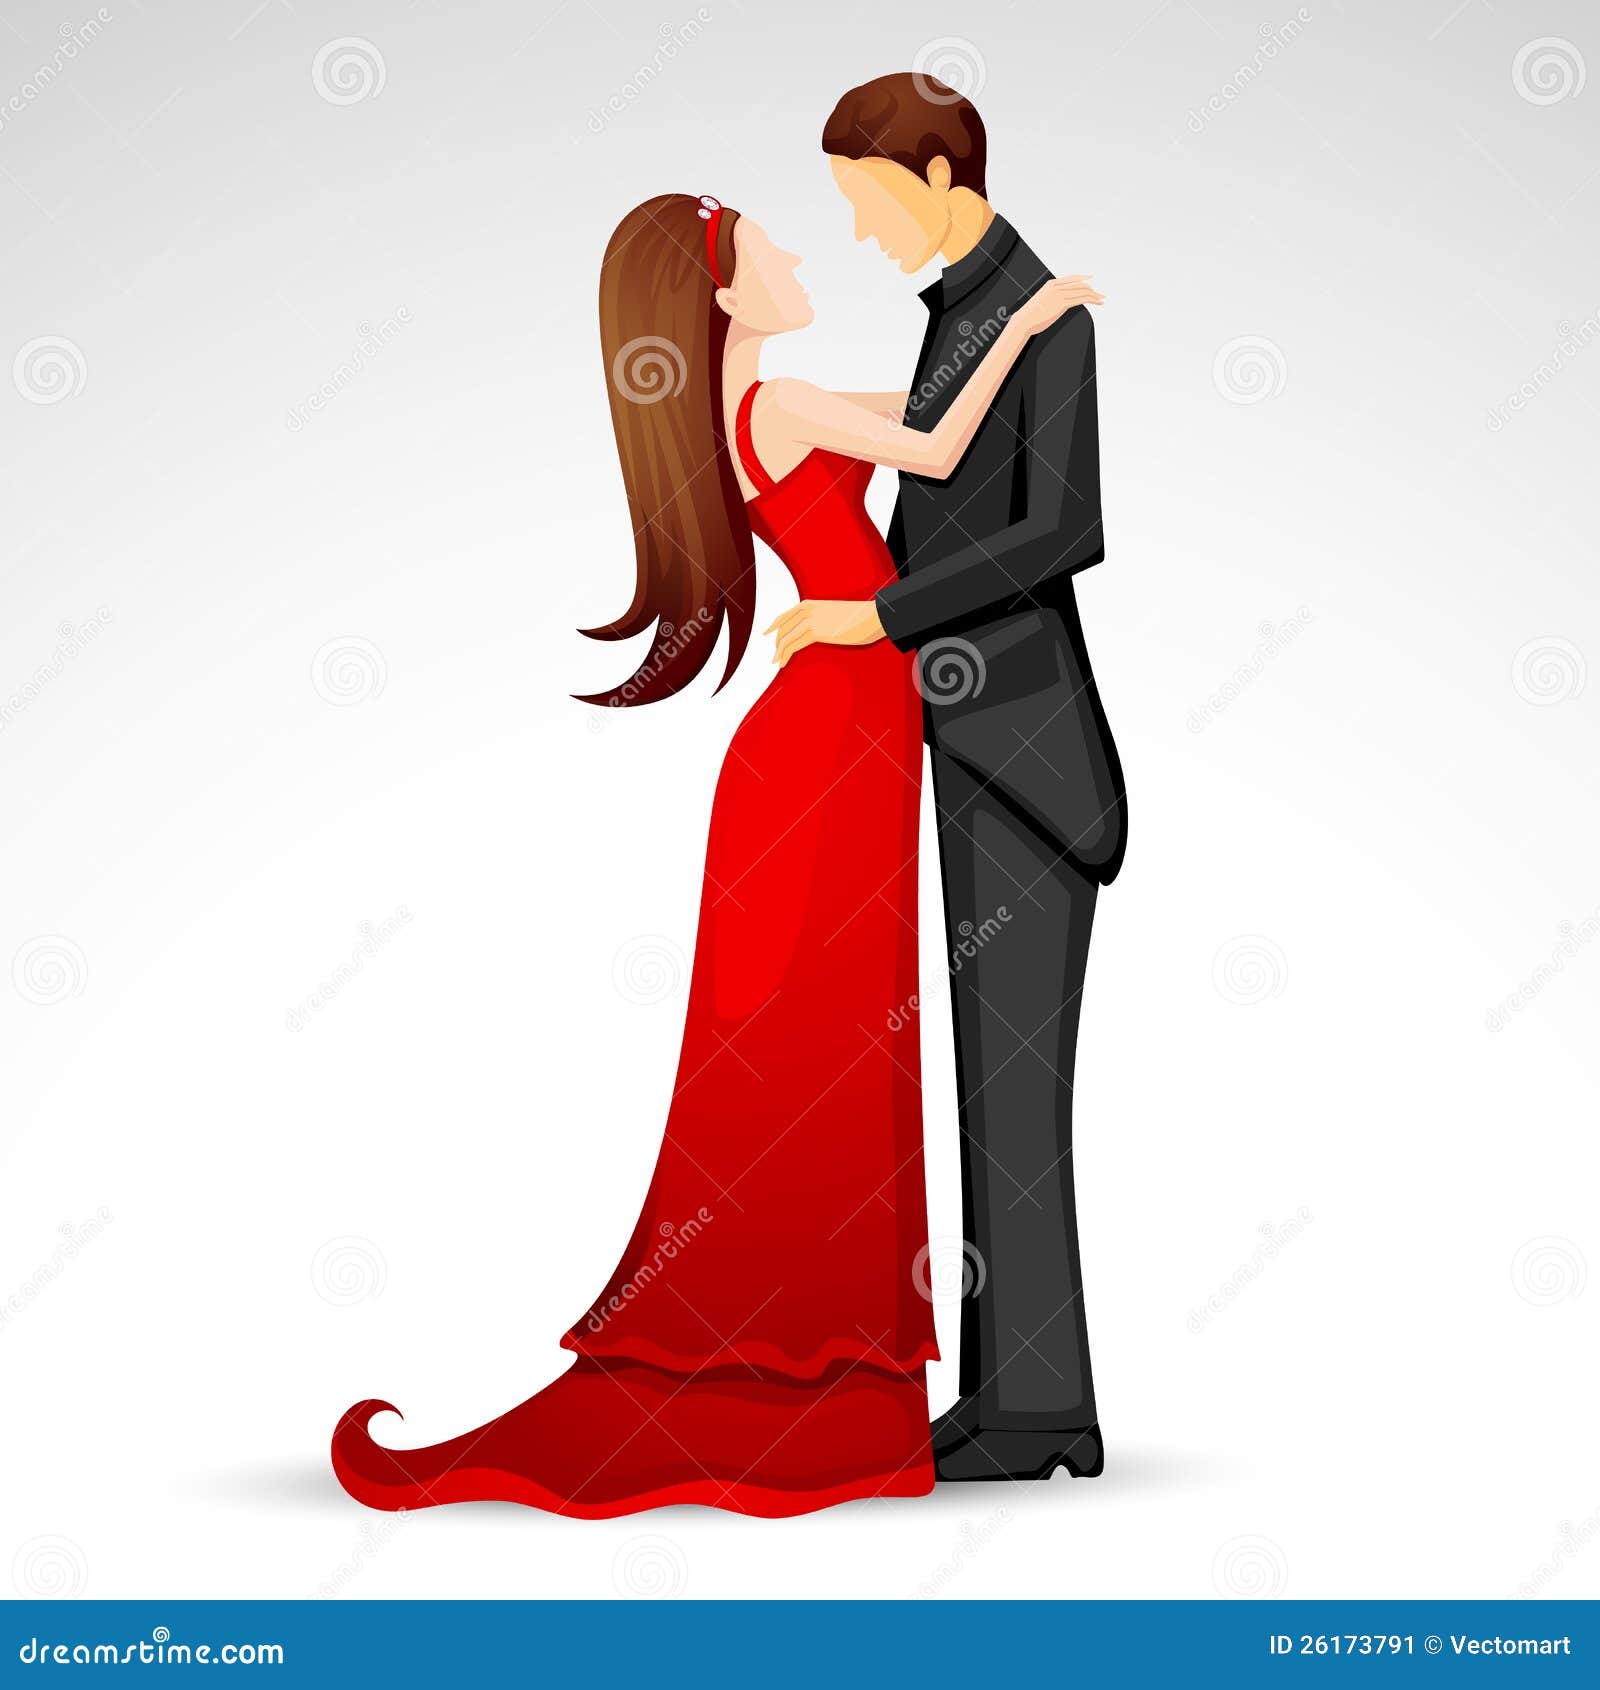 Newly Married Couple stock vector. Illustration of ball - 26173791